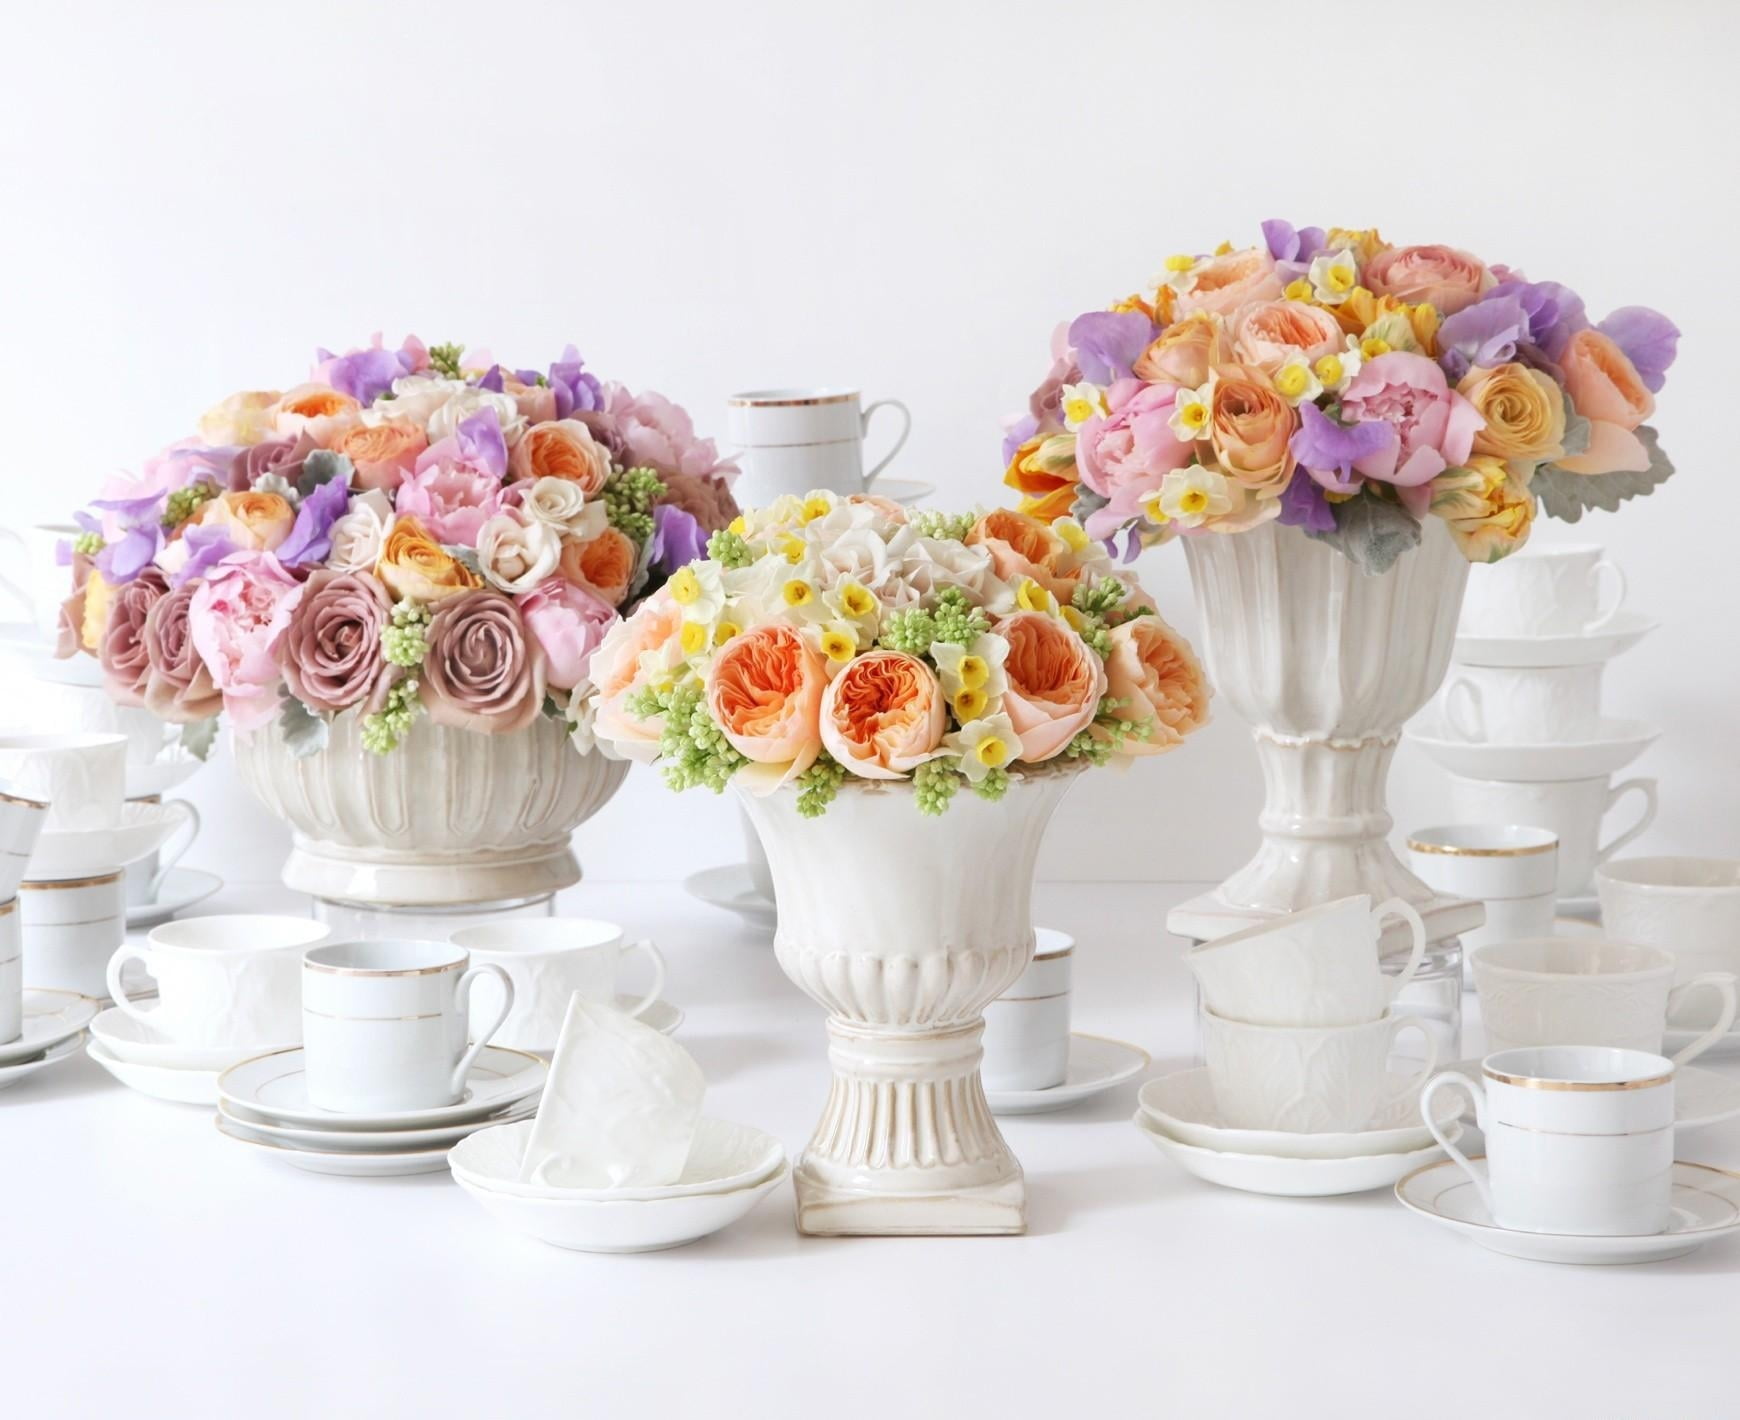 white ceramic cups and saucers, roses, daffodils, ranunkulyus